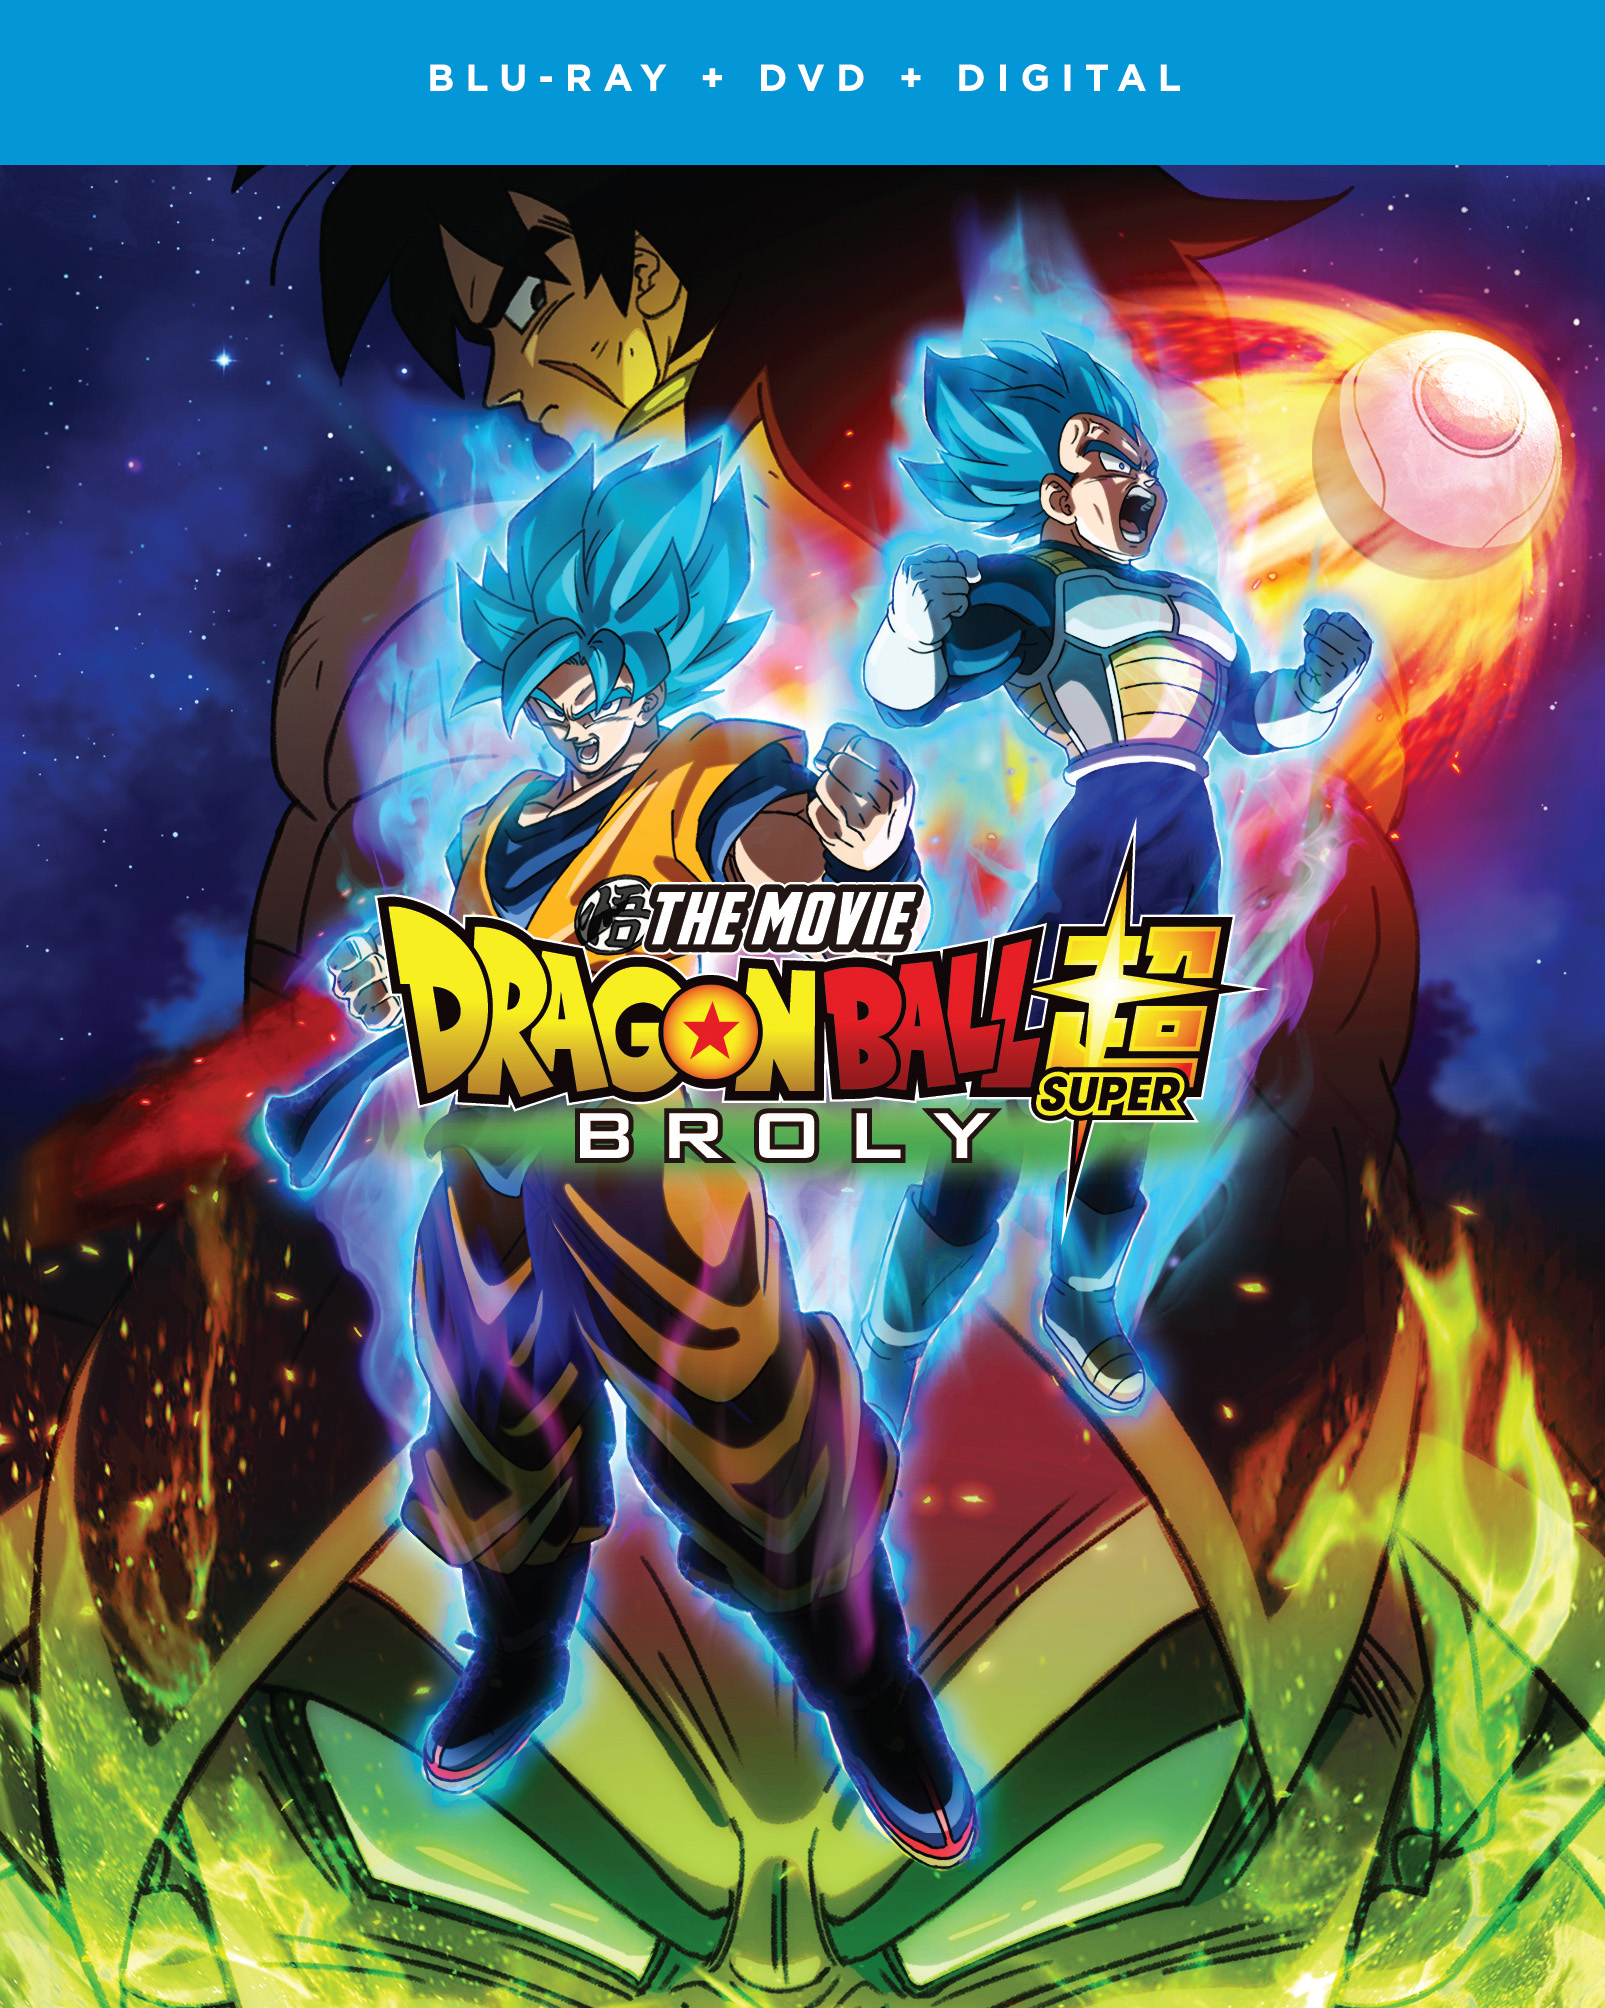 Dragon Ball Super Broly Includes Digital Copy Blu Ray Dvd 2019 Best Buy The theme for this remarkable new film will be saiyan, the strongest race in the universe. dragon ball super broly includes digital copy blu ray dvd 2019